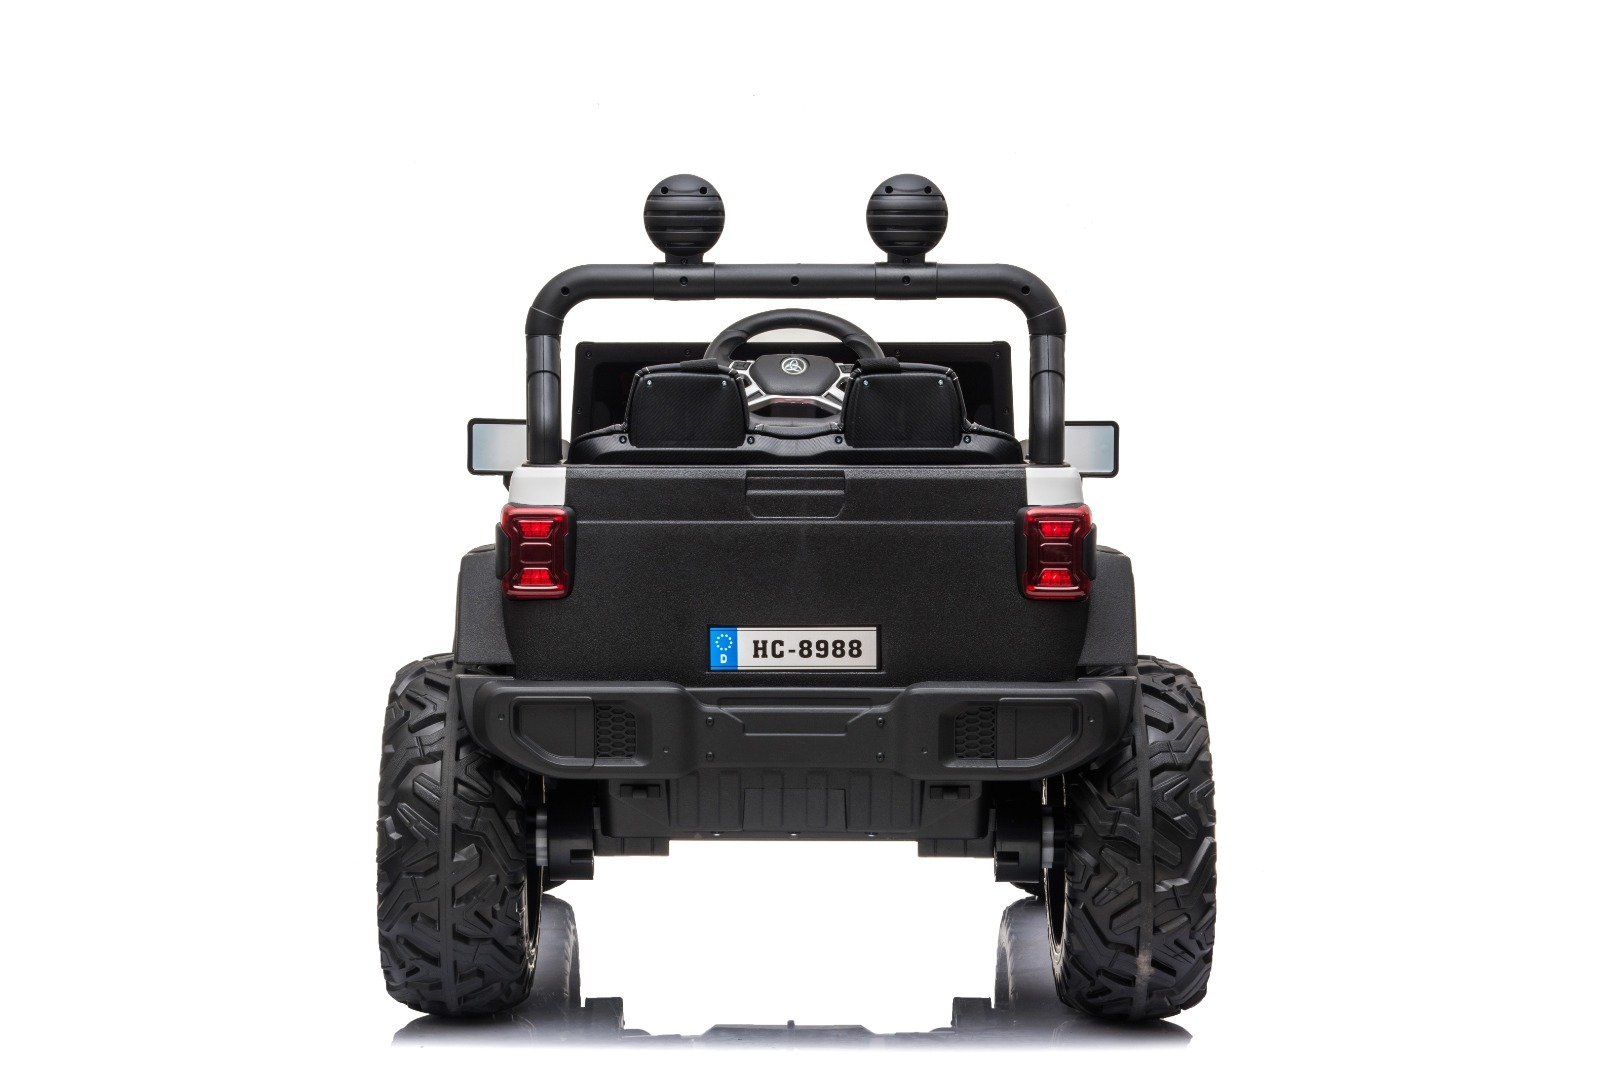 Jeep Wrangler Ride On Toy for Kids - Buy Online | Little Riders